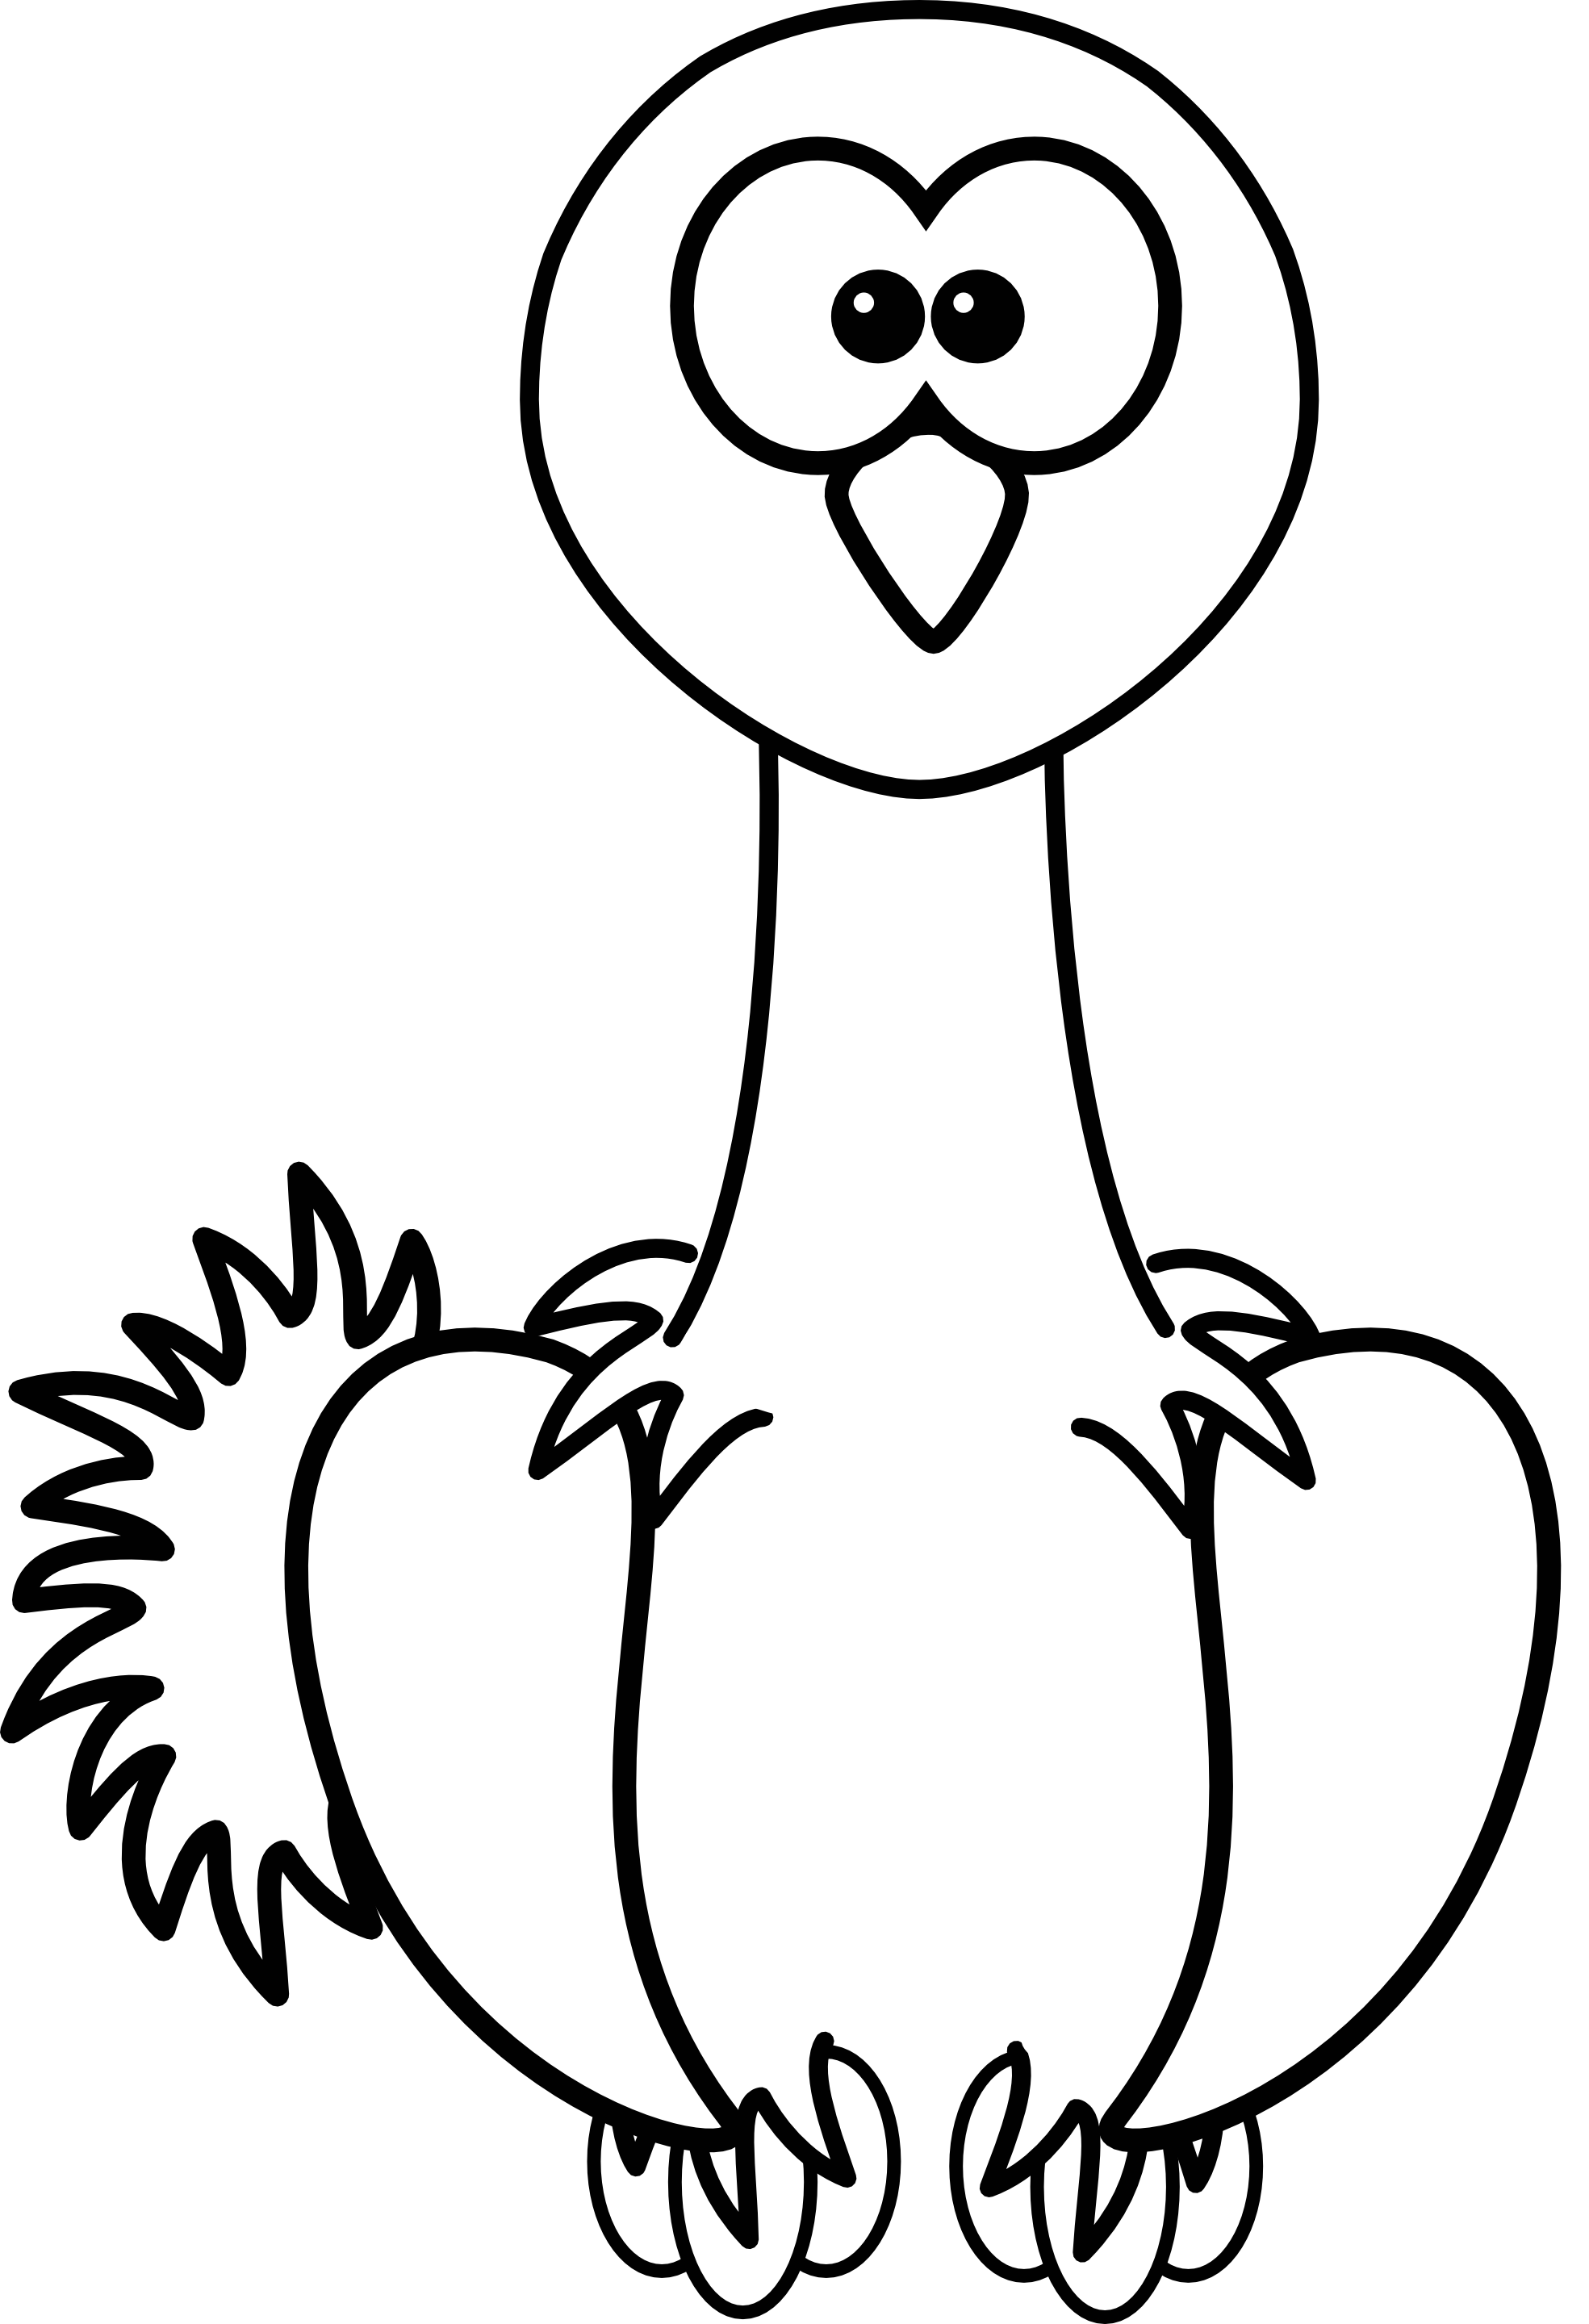 Ostrich svg #2, Download drawings